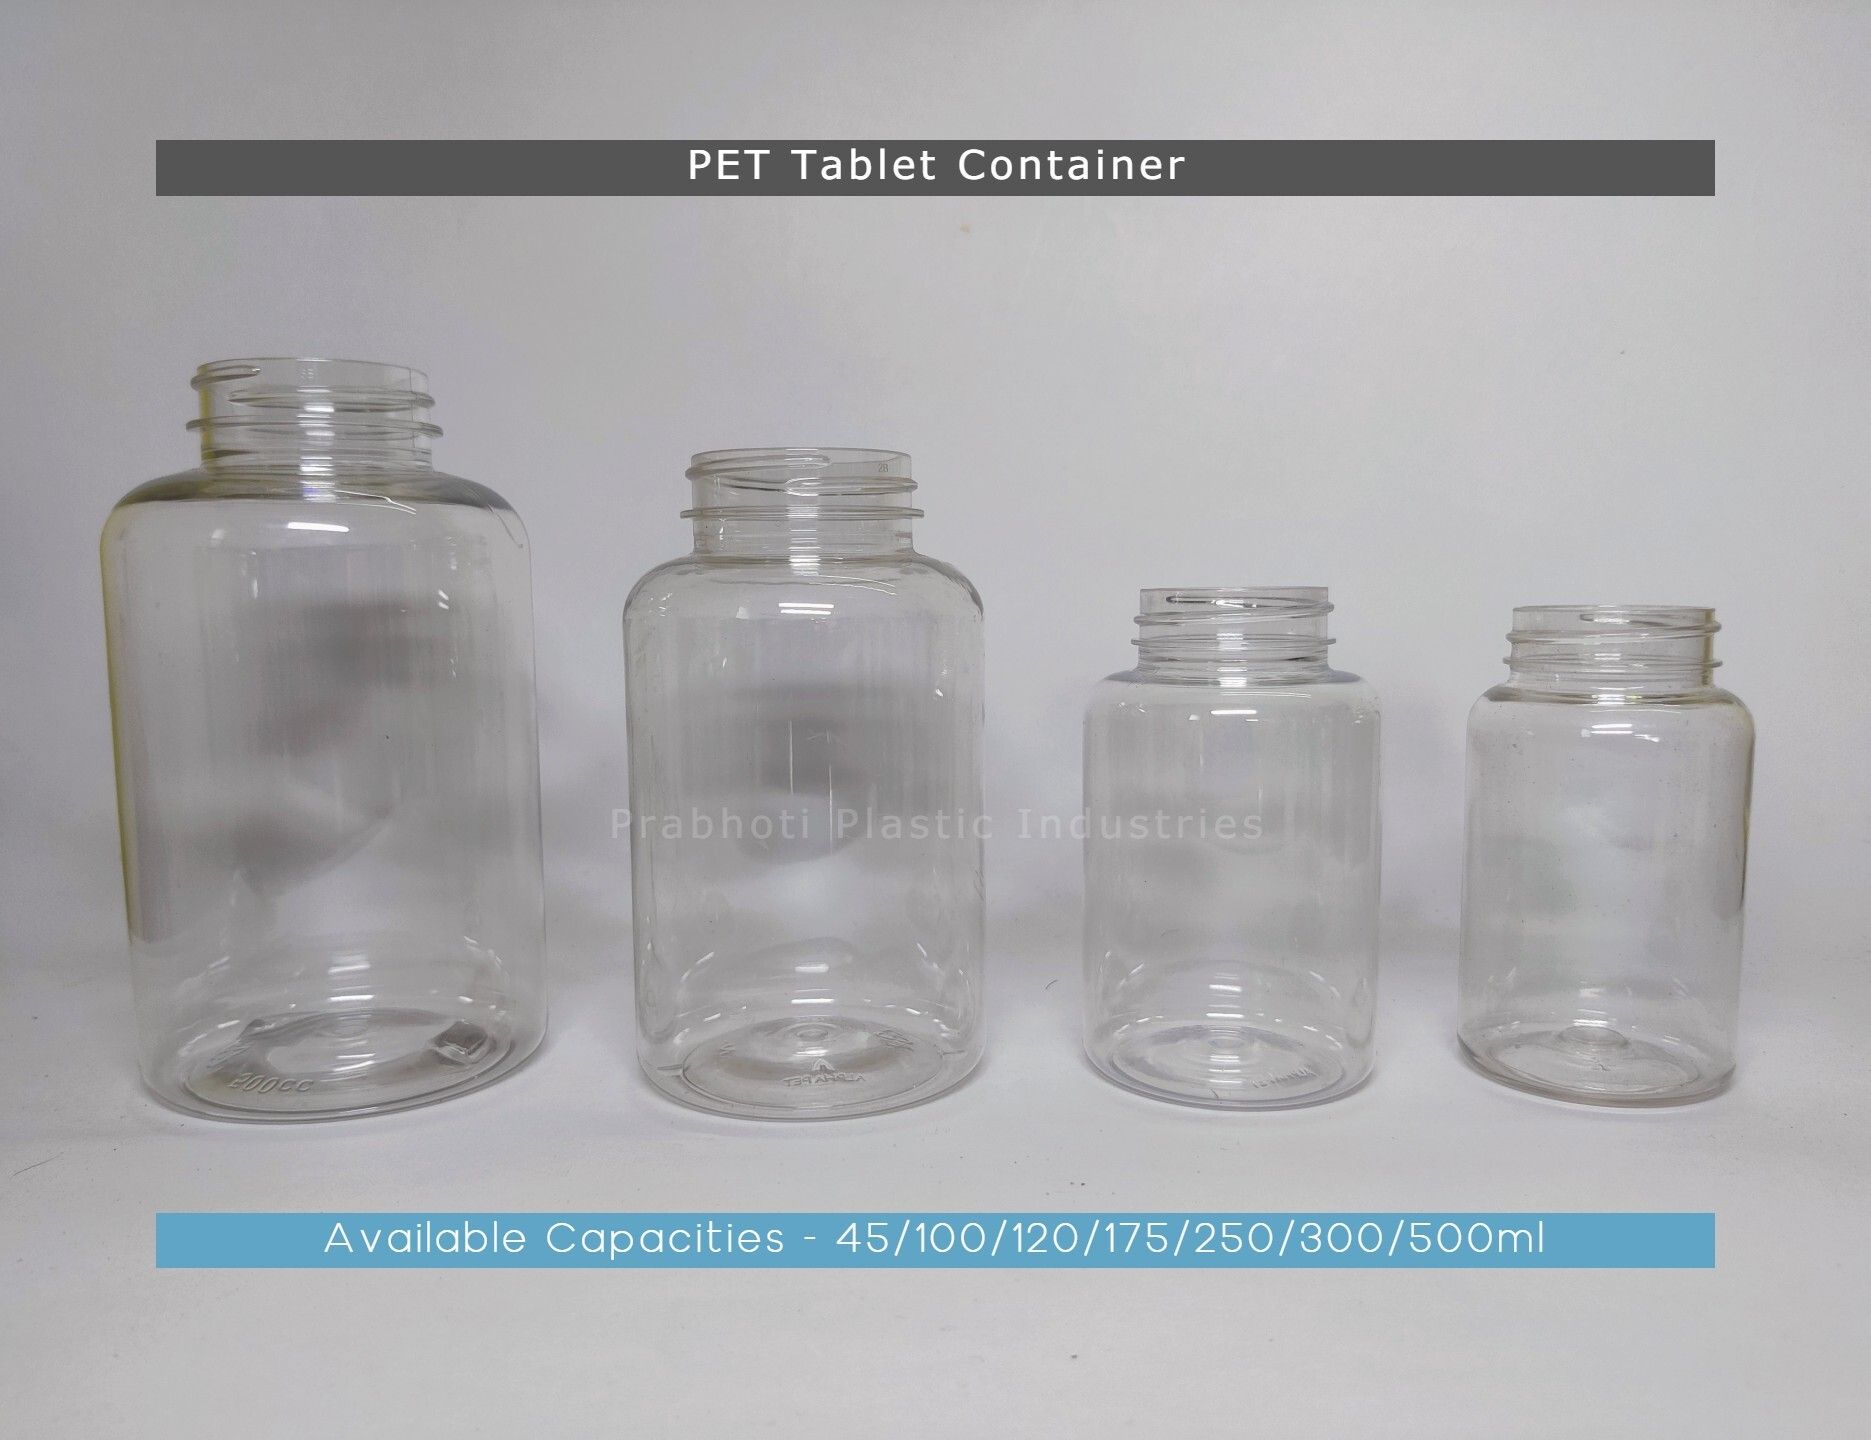 Pet Tablet Container with metalized Caps